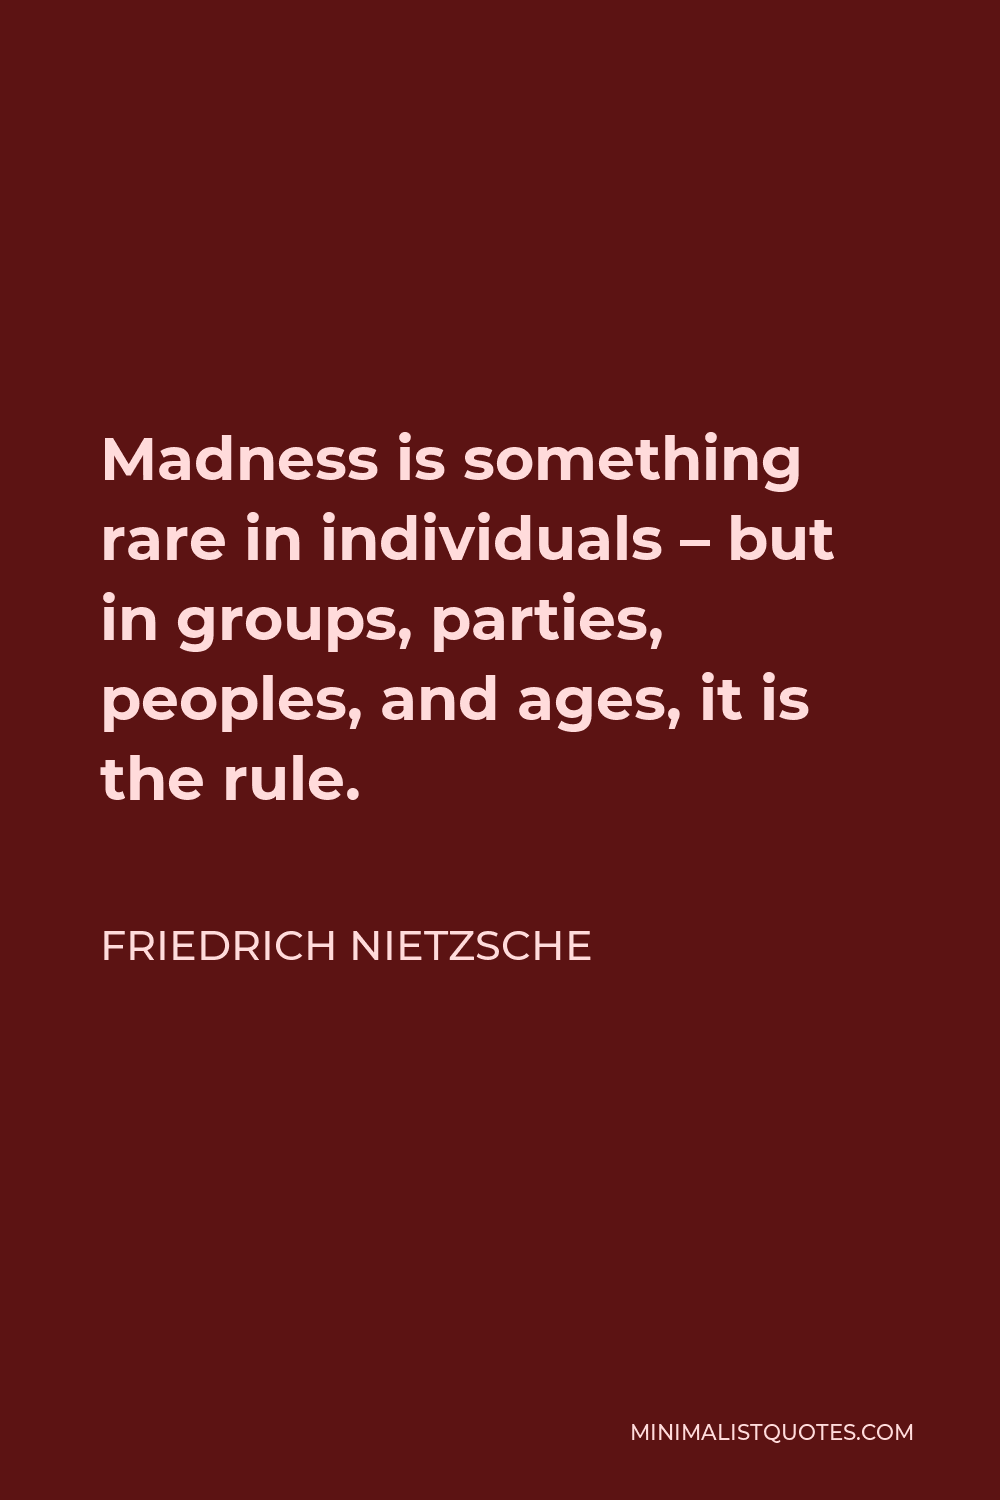 Friedrich Nietzsche Quote - Madness is something rare in individuals – but in groups, parties, peoples, and ages, it is the rule.